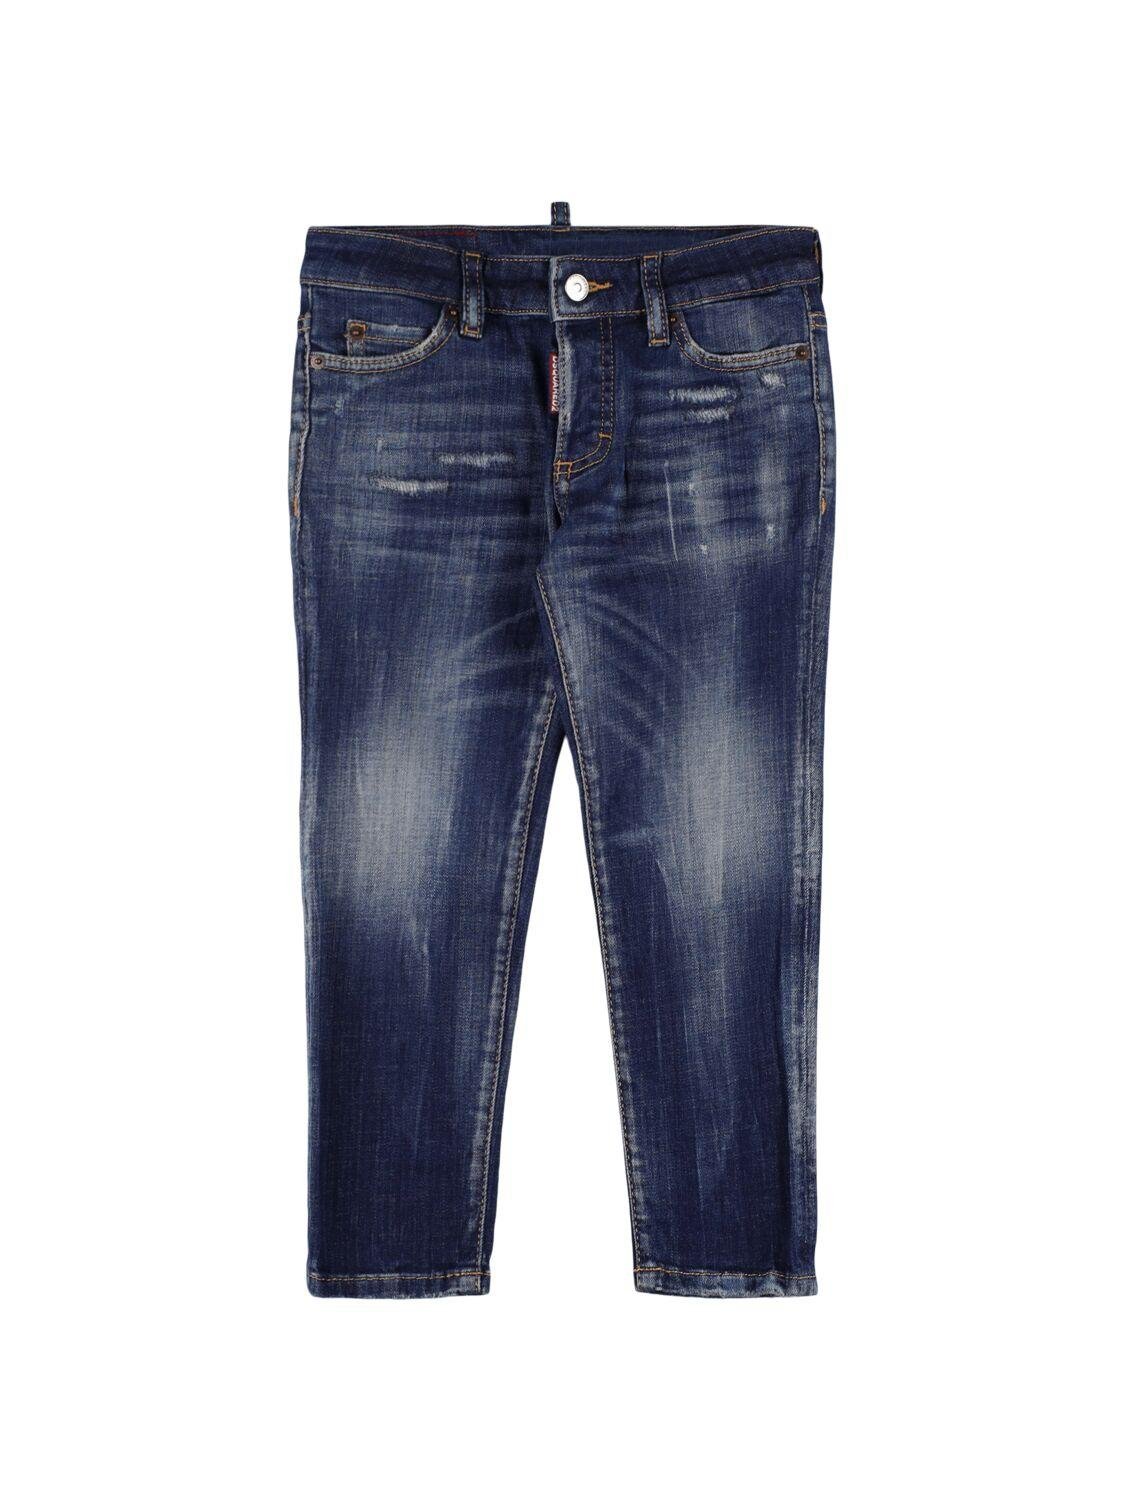 Stretch Cotton Denim Jeans by DSQUARED2